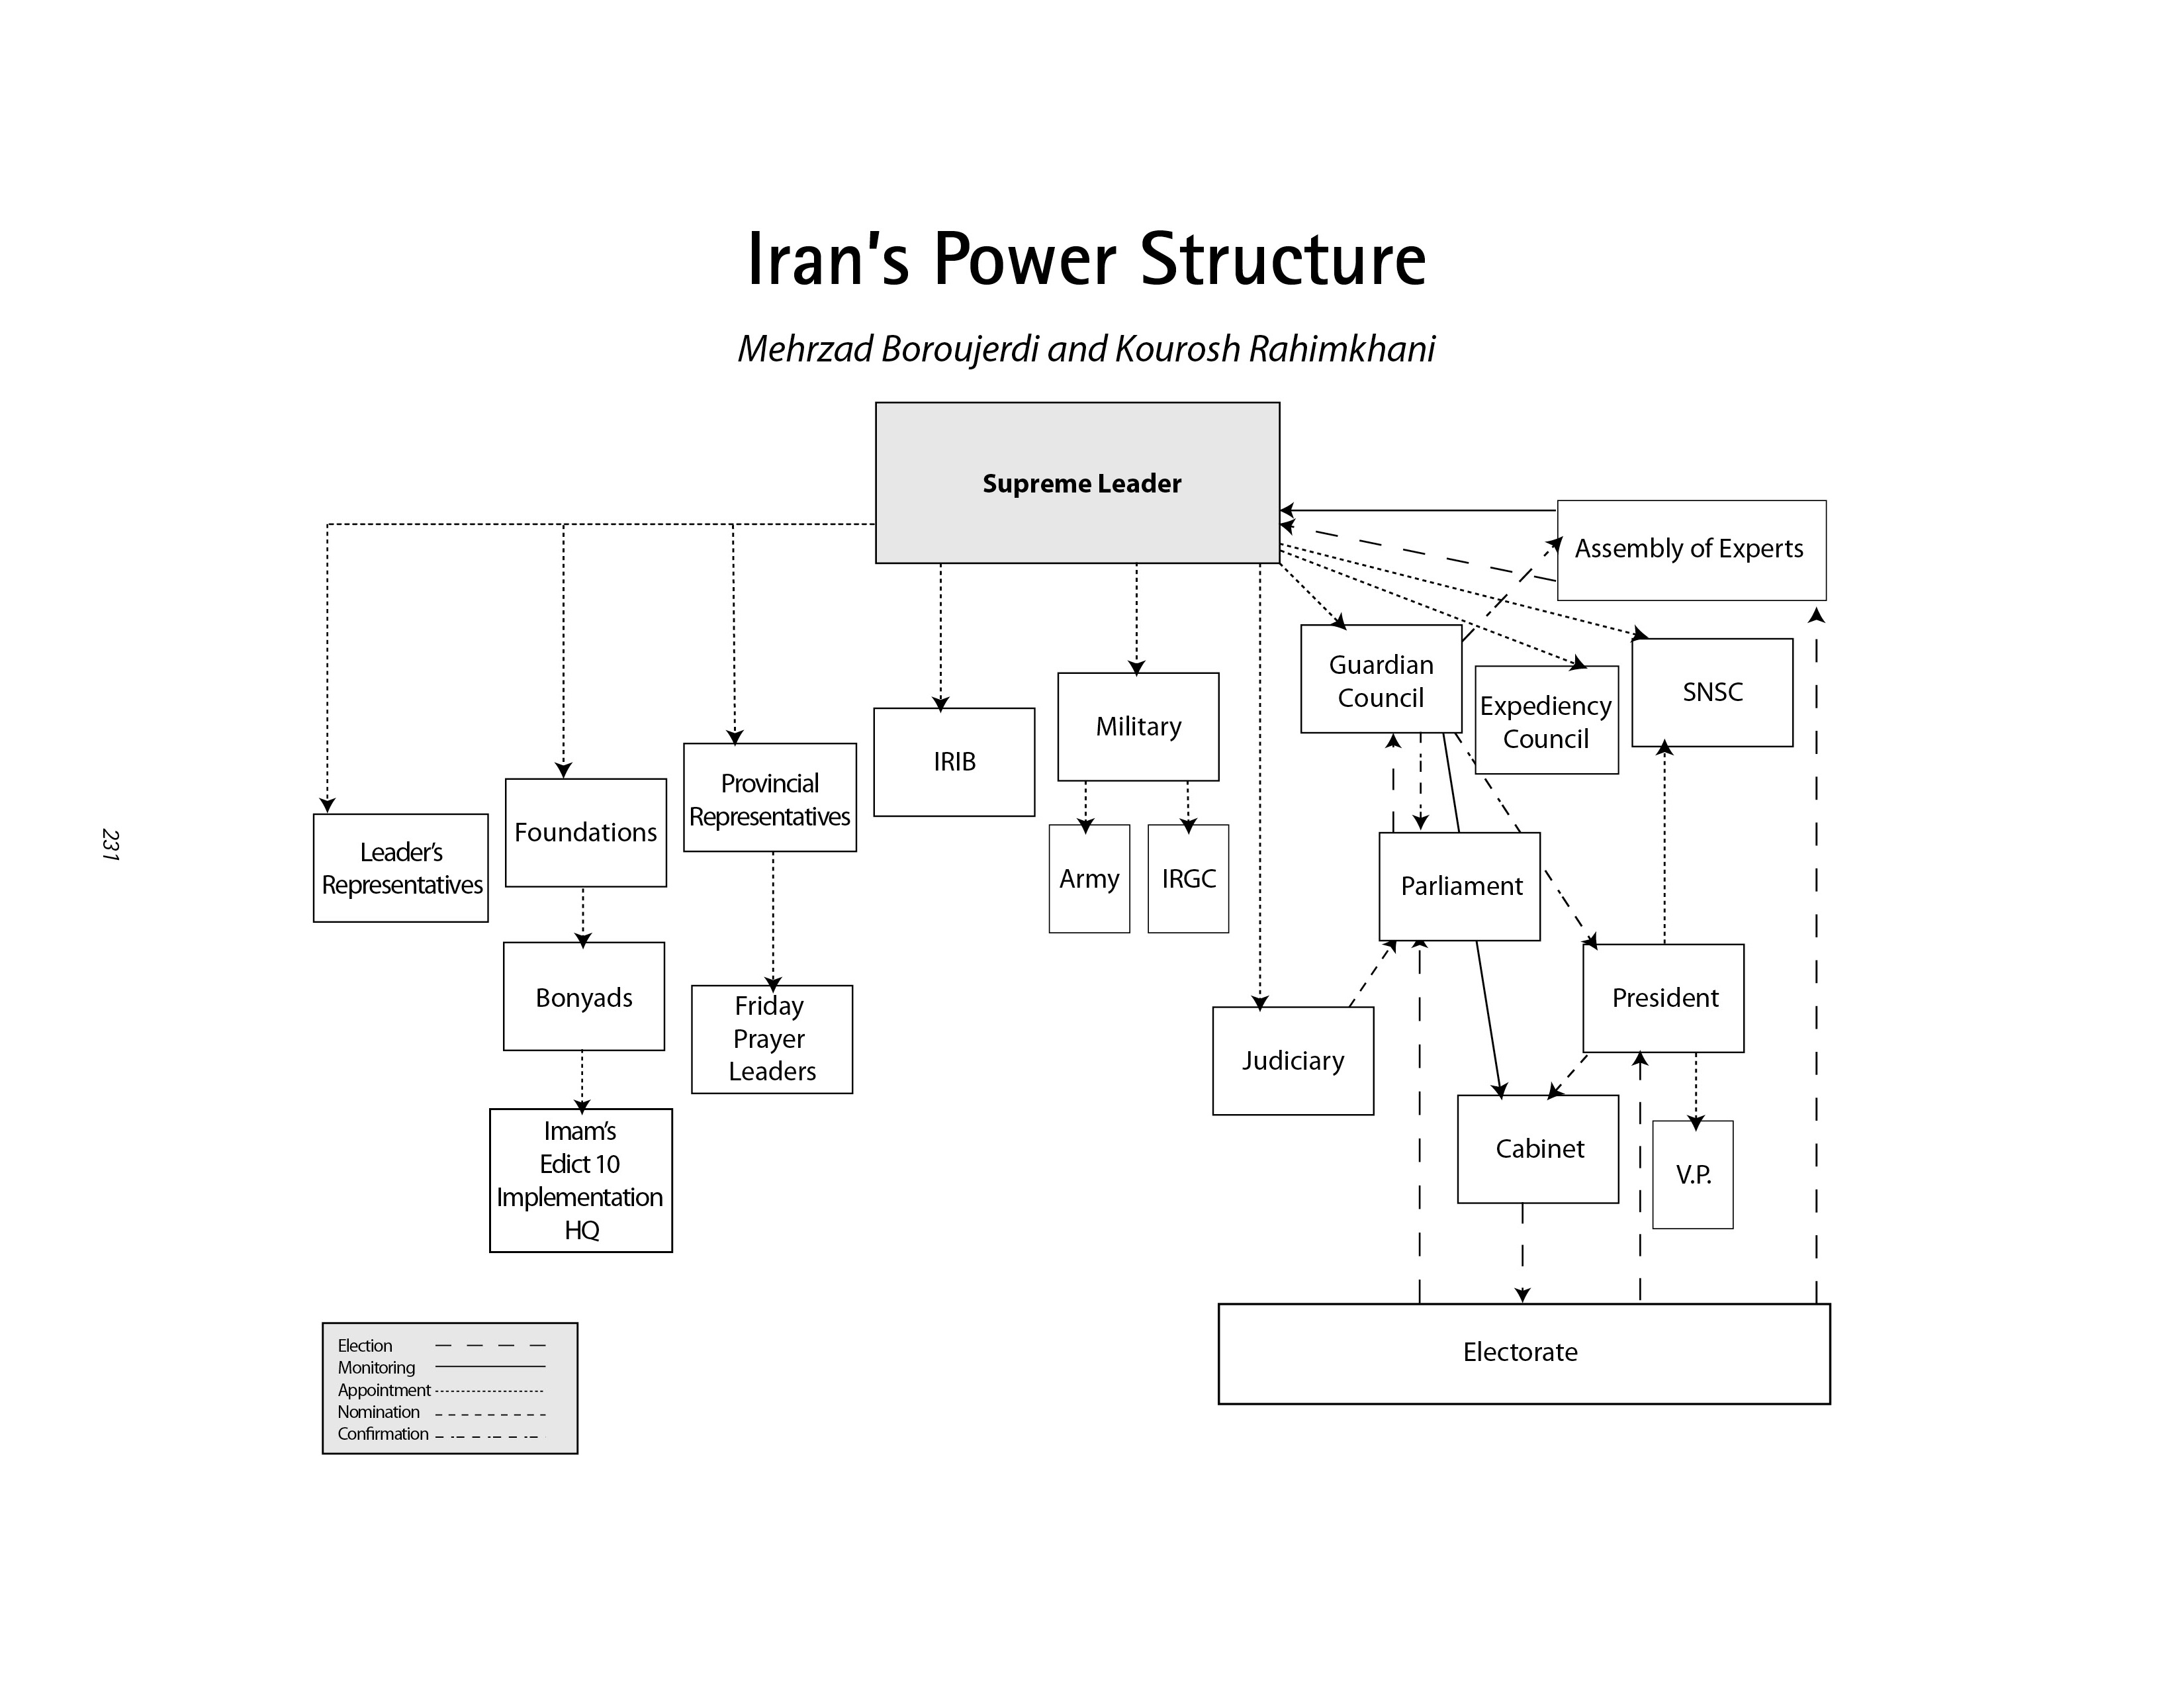 Iran's Power Structure chart